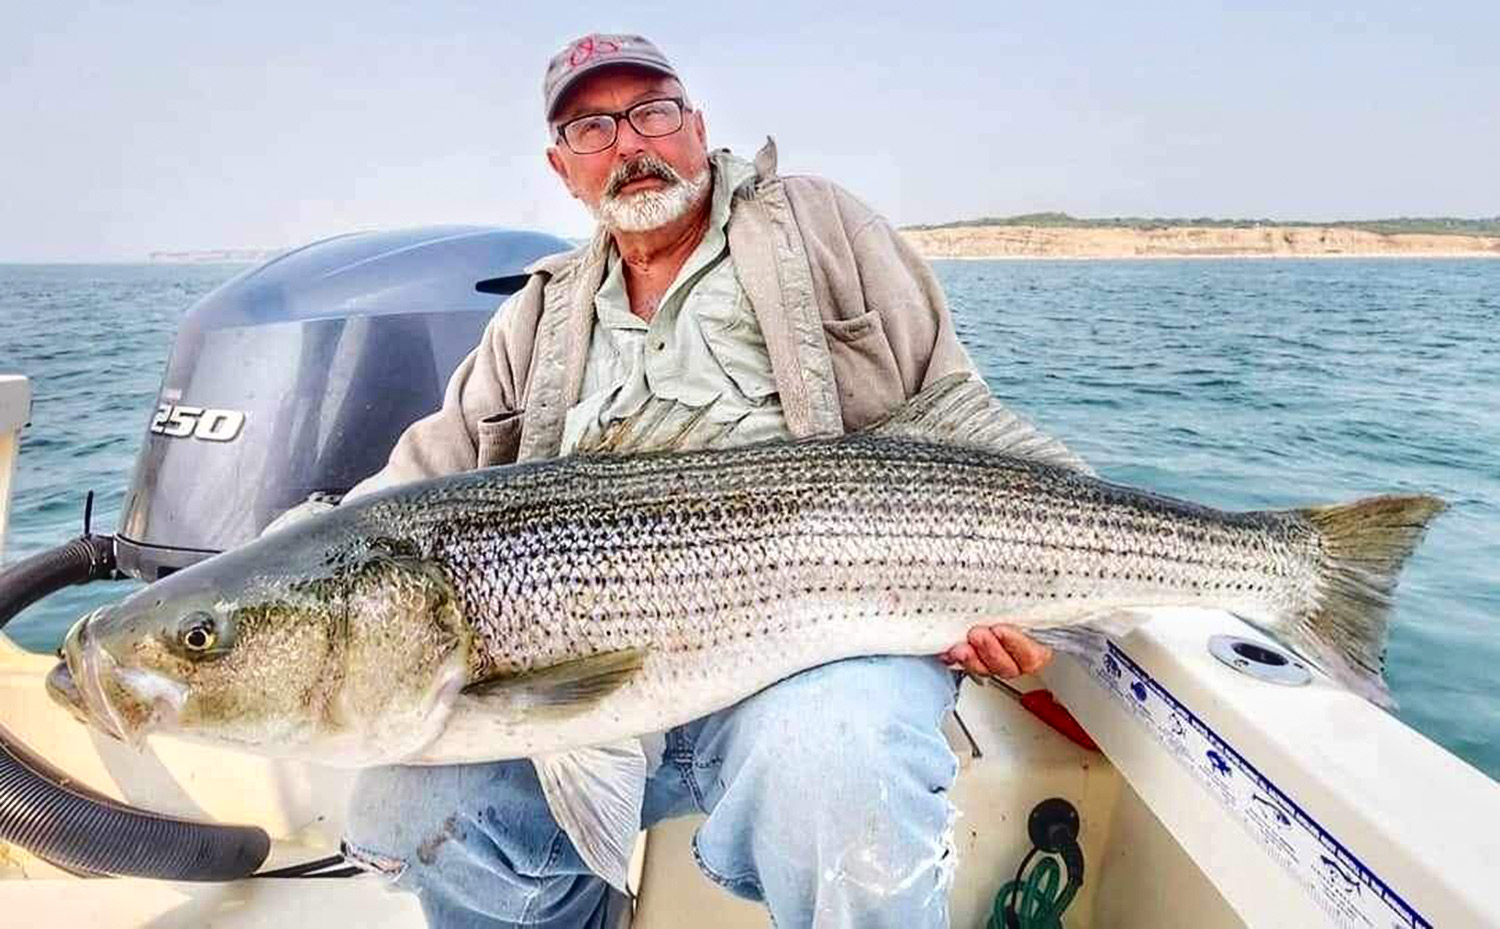 Going Fishing - Striped Bass Inventory